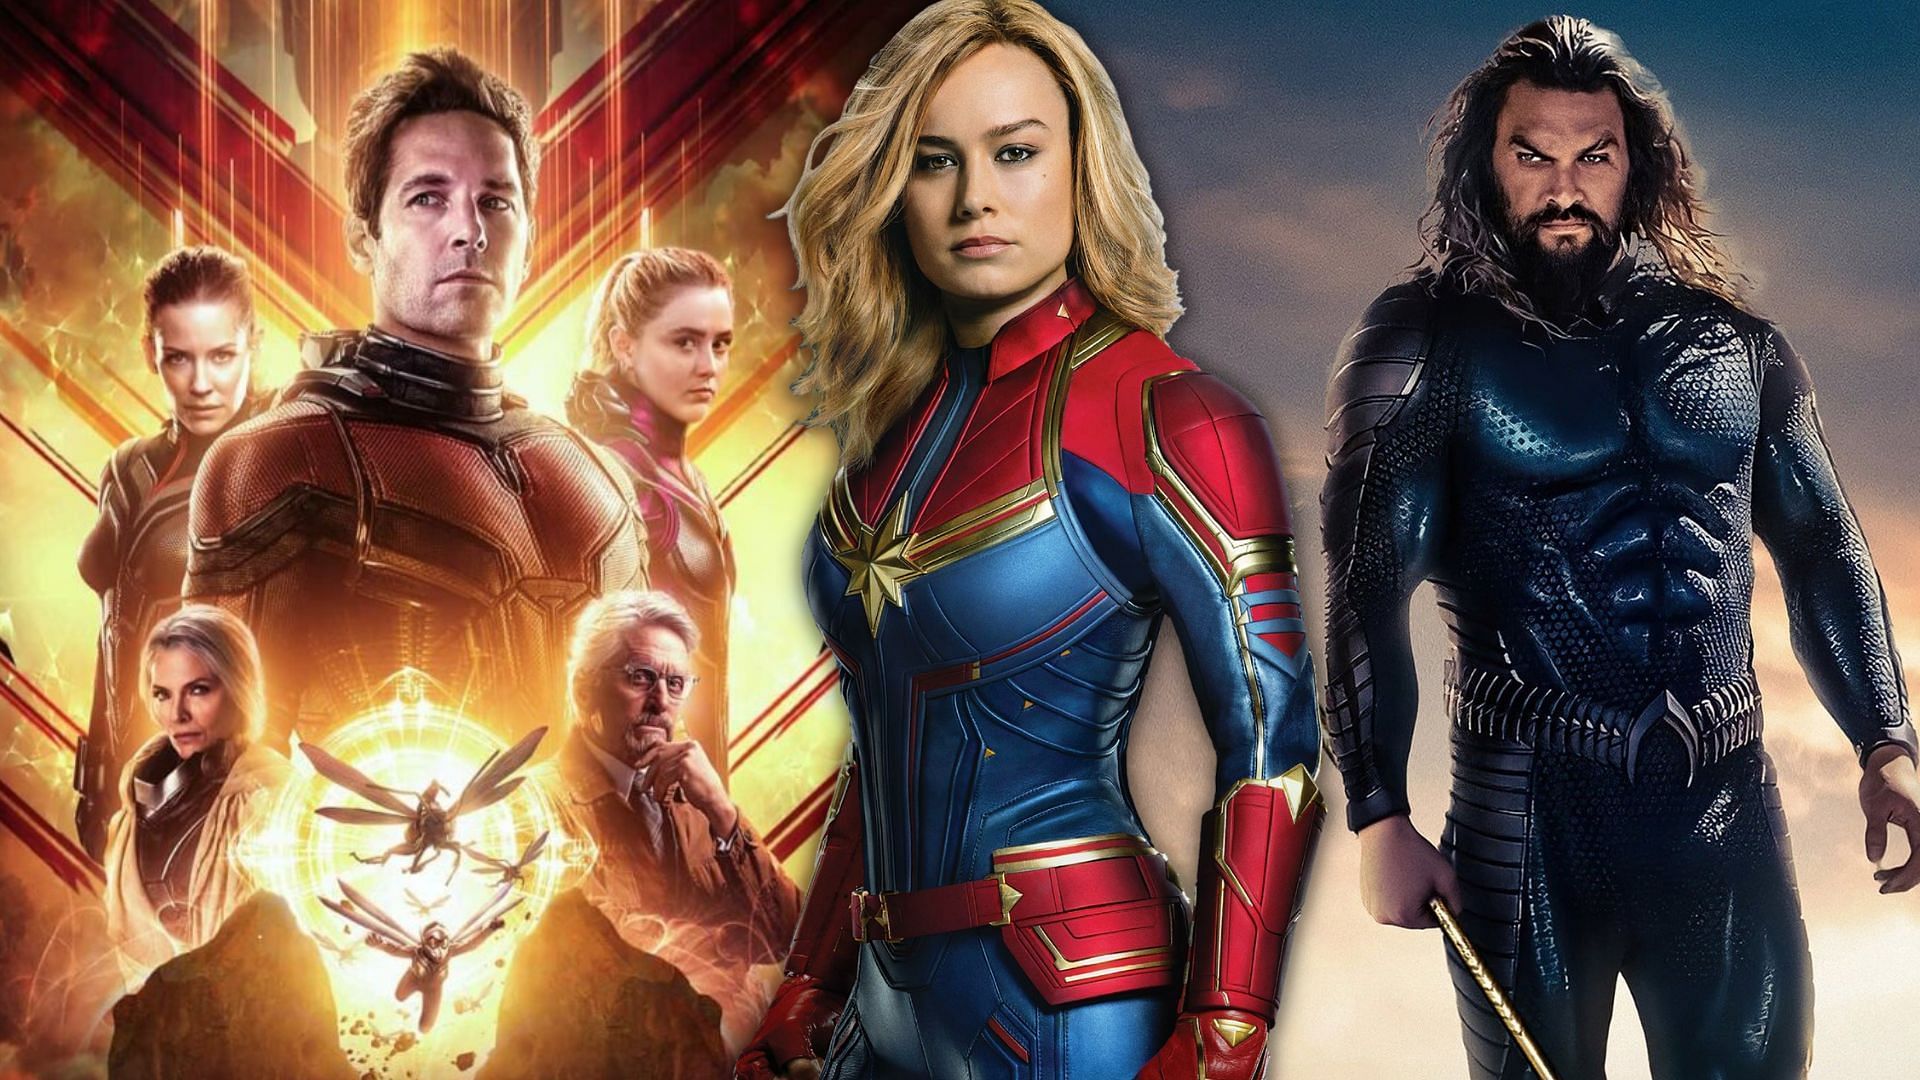 All 9 Marvel and DC movies that are coming in 2023